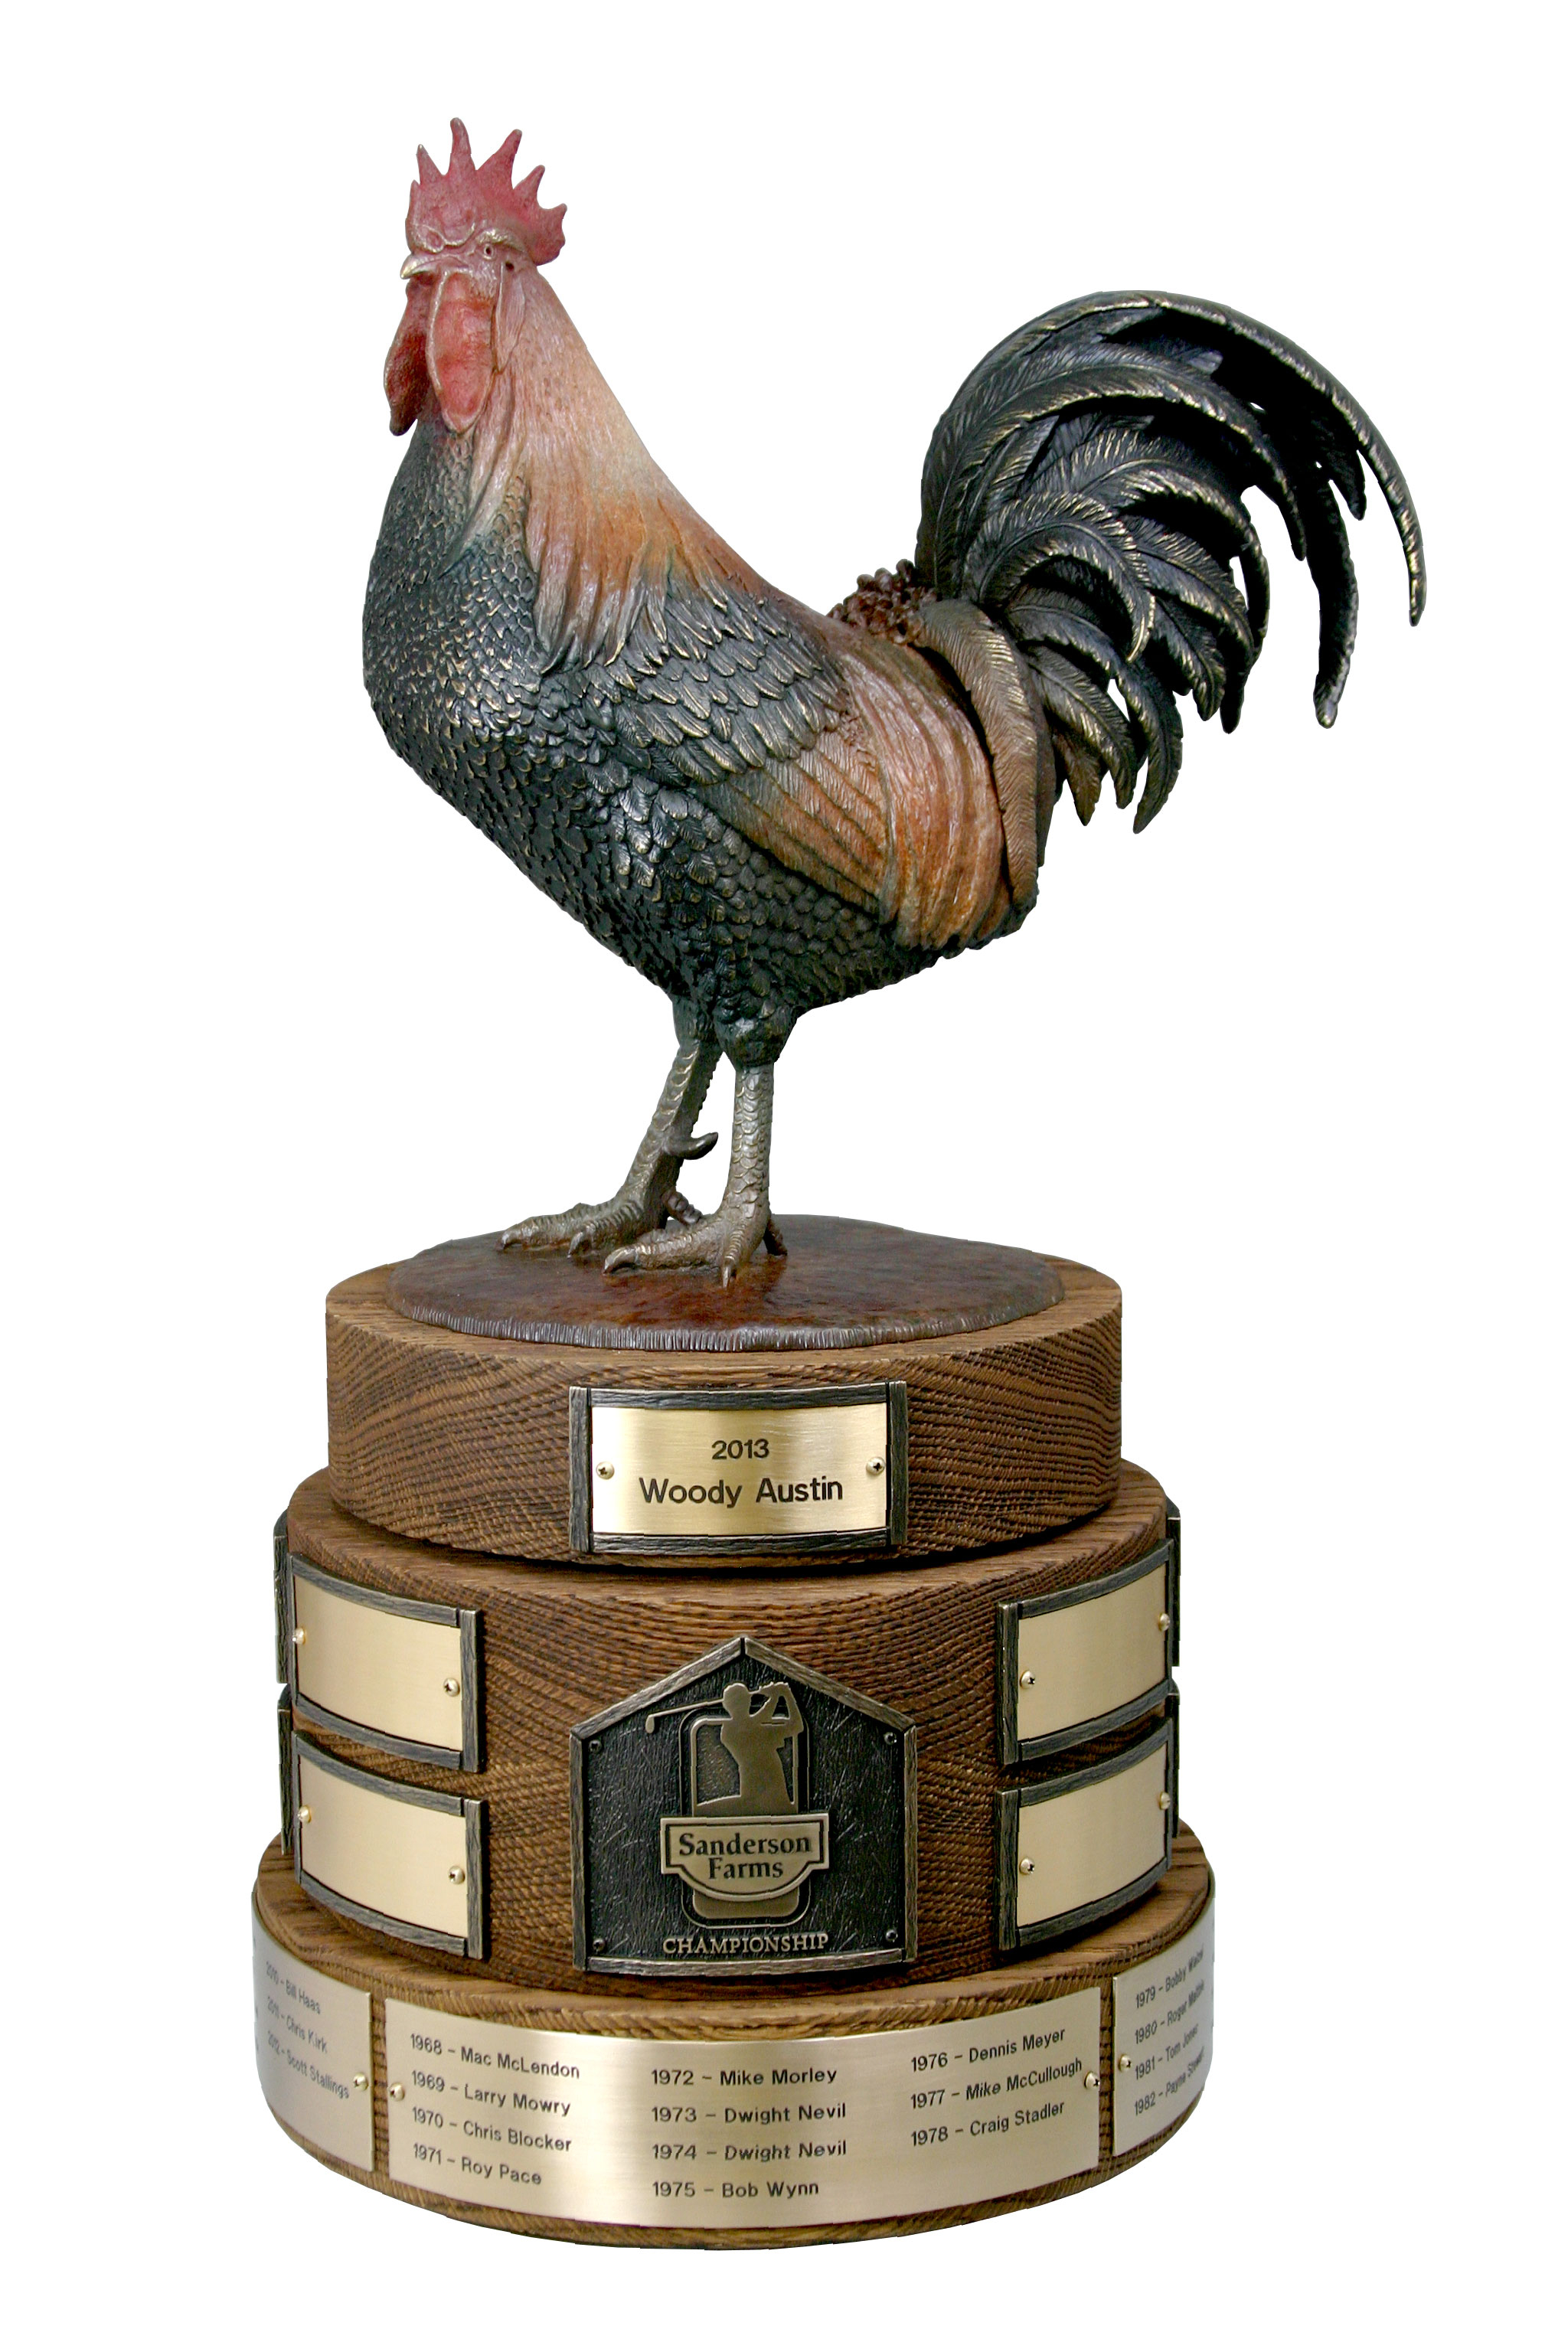 Sanderson Farms Championship perpetual trophy made by Malcolm DeMille